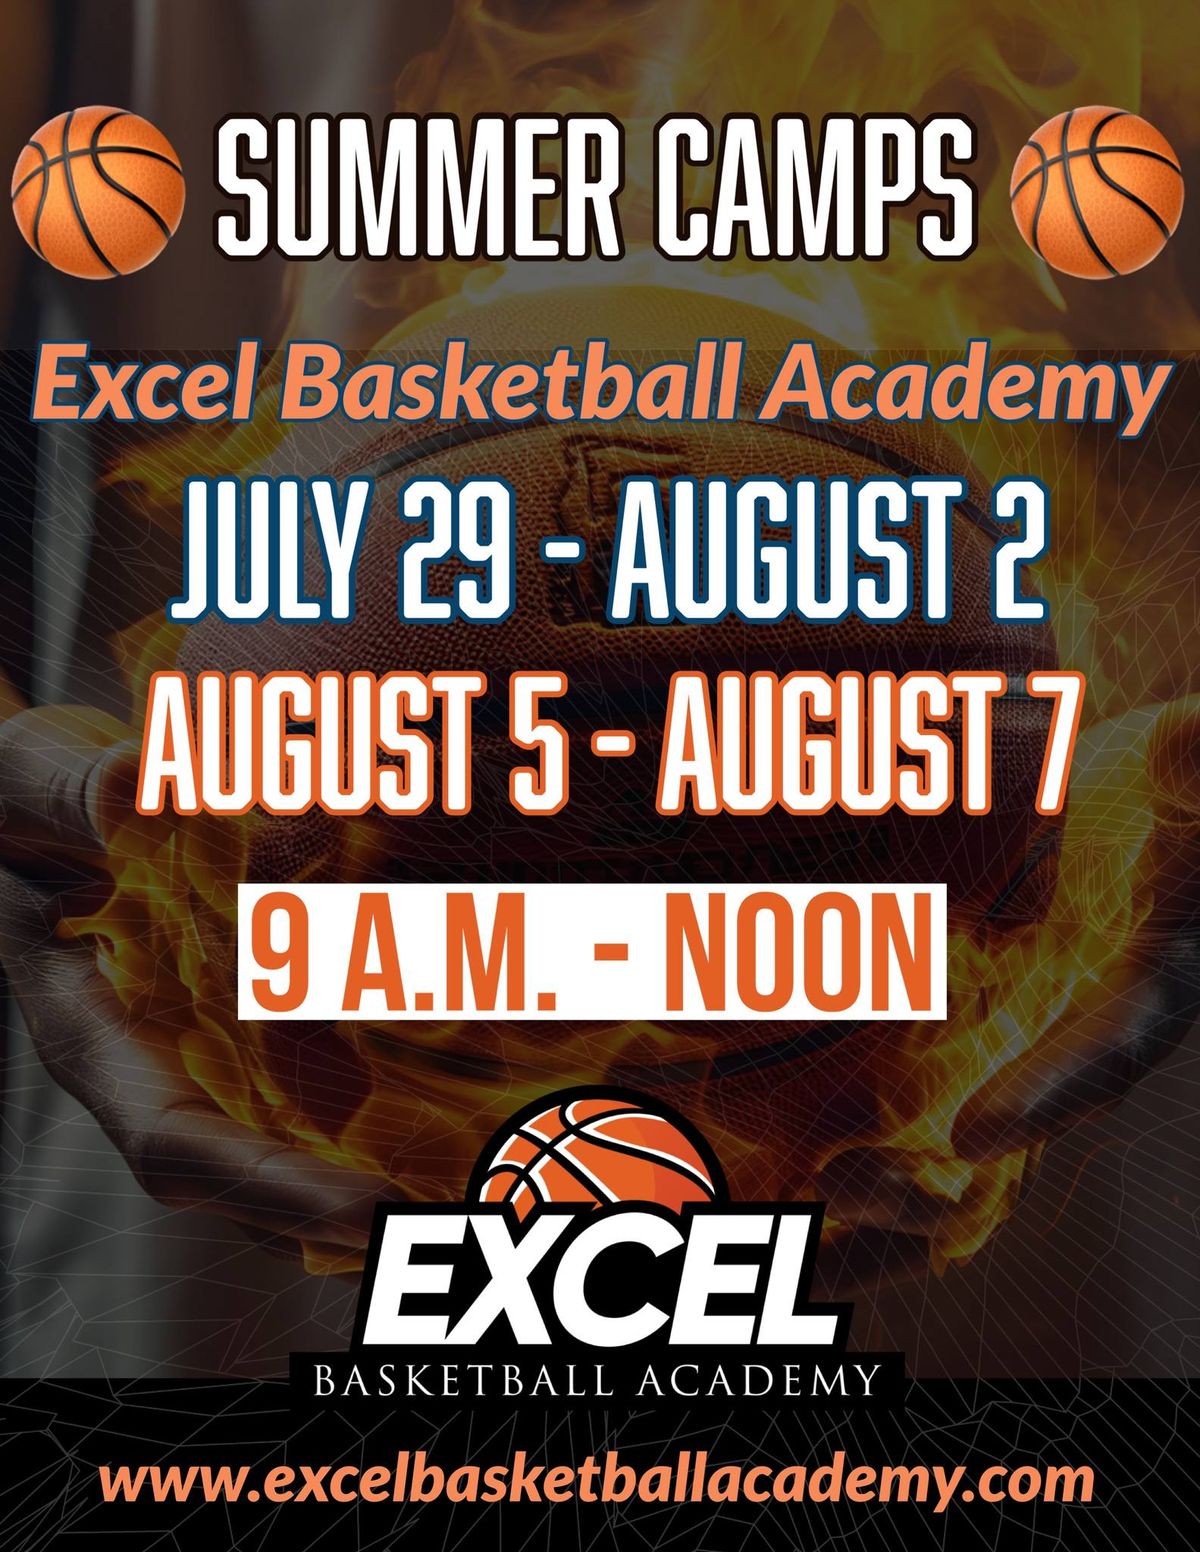 Excel Basketball Academy - Summer Camp - Session 1